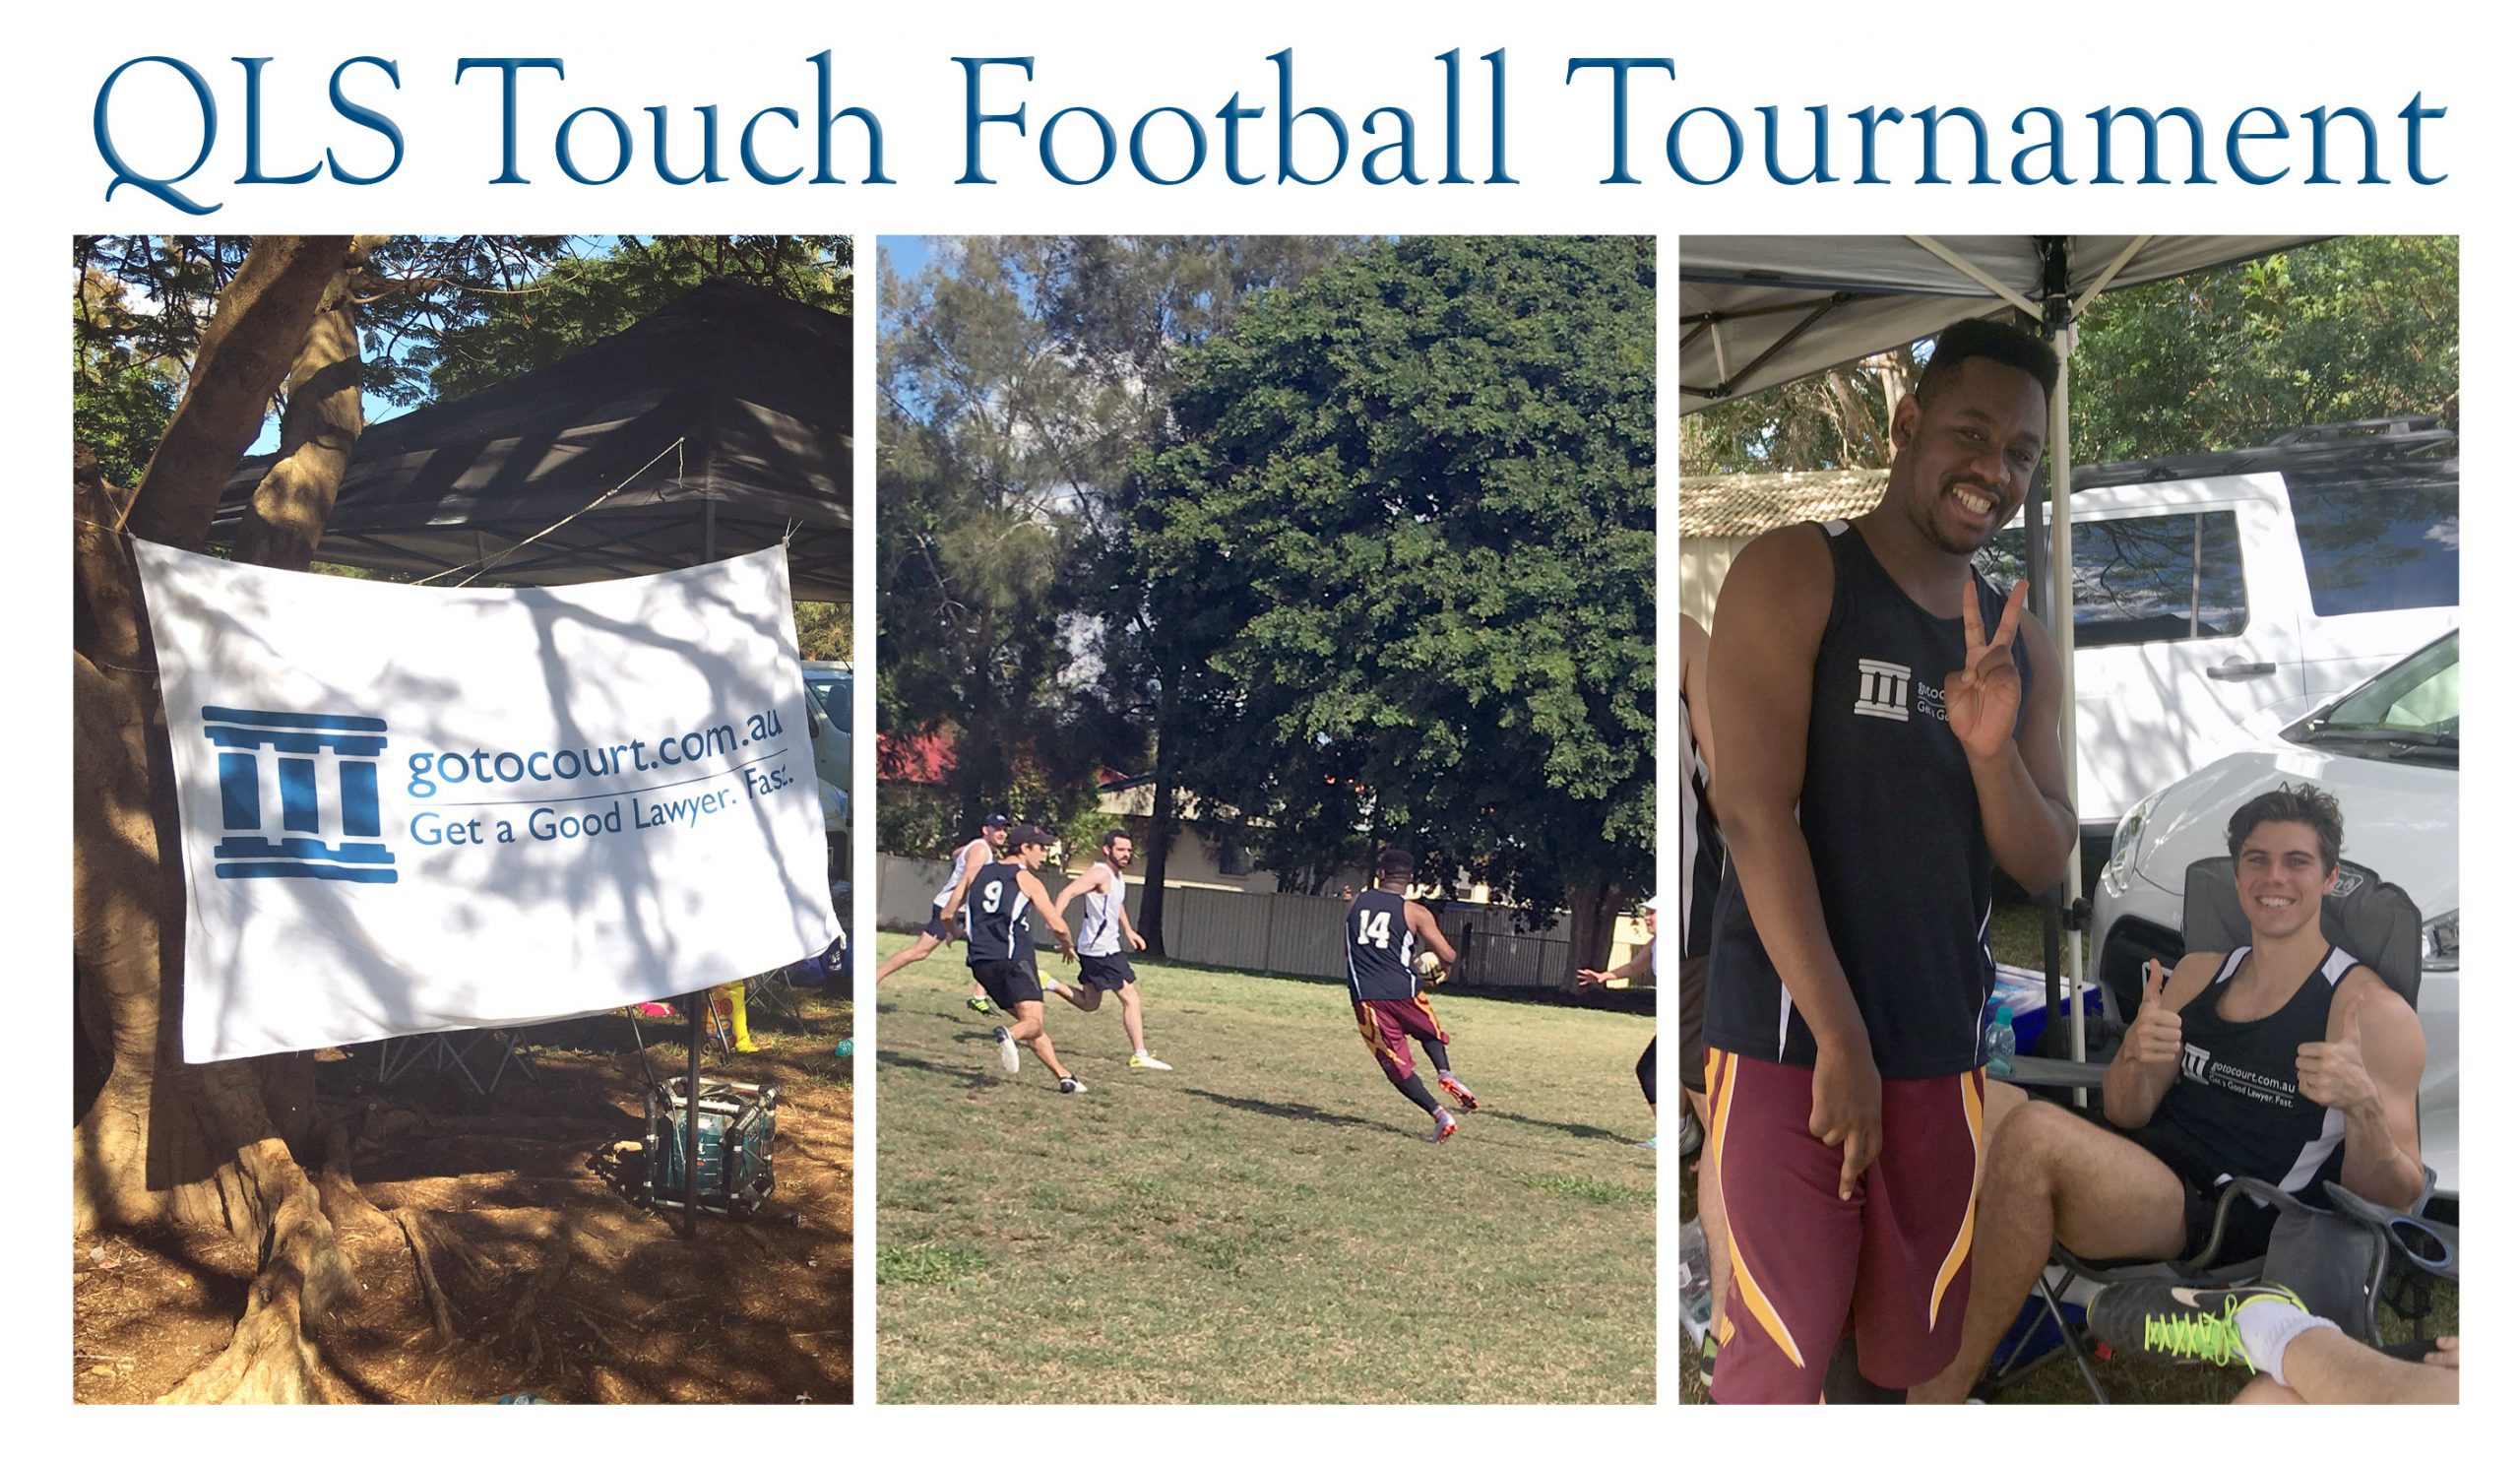 GTC Lawyers at the 2016 QLS Touch Football Tournament in Brisbane